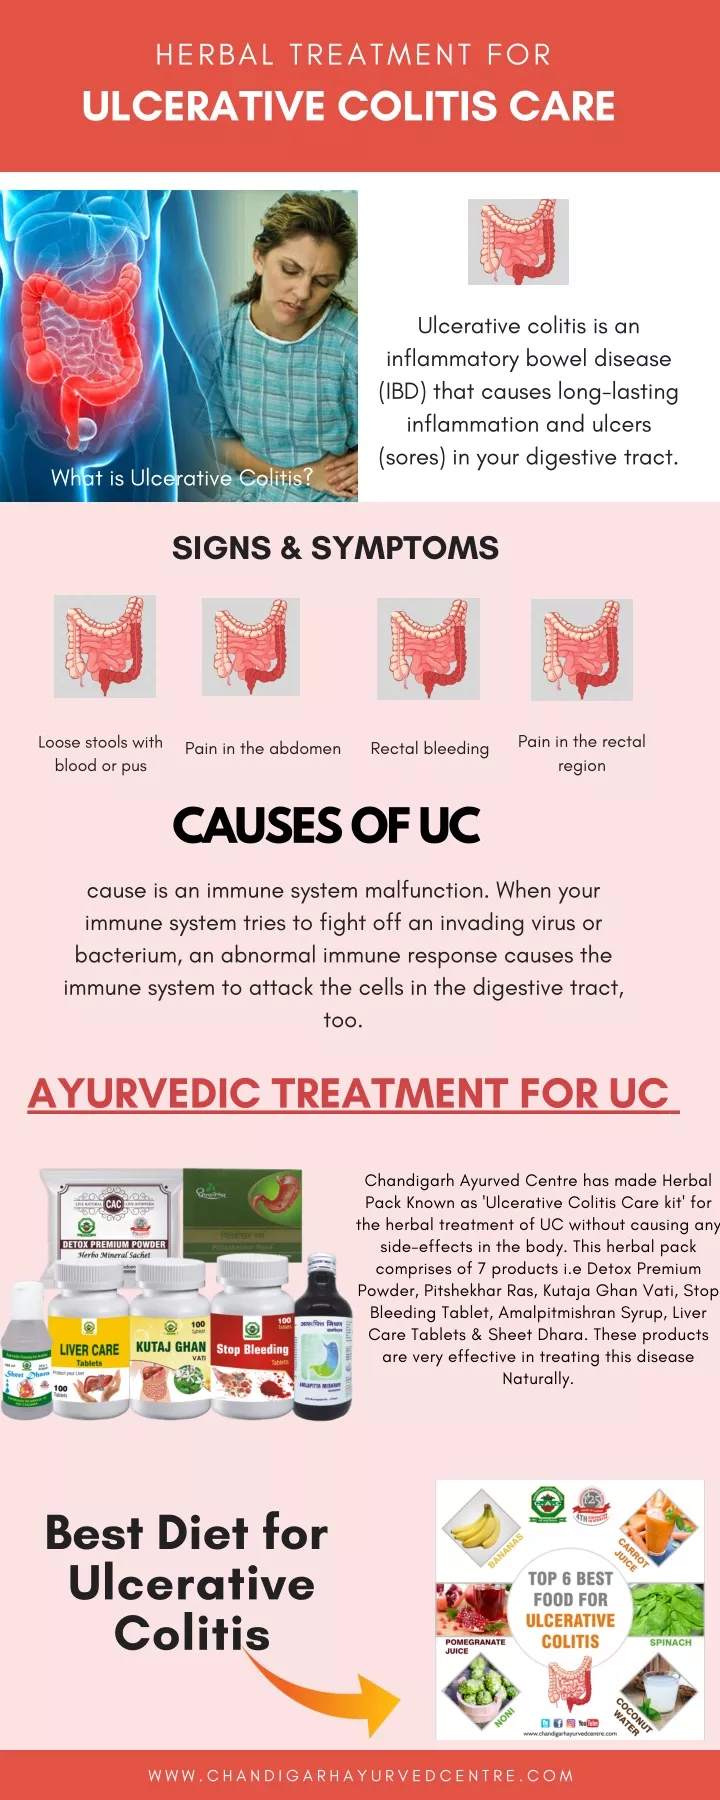 herbal treatment for ulcerative colitis care